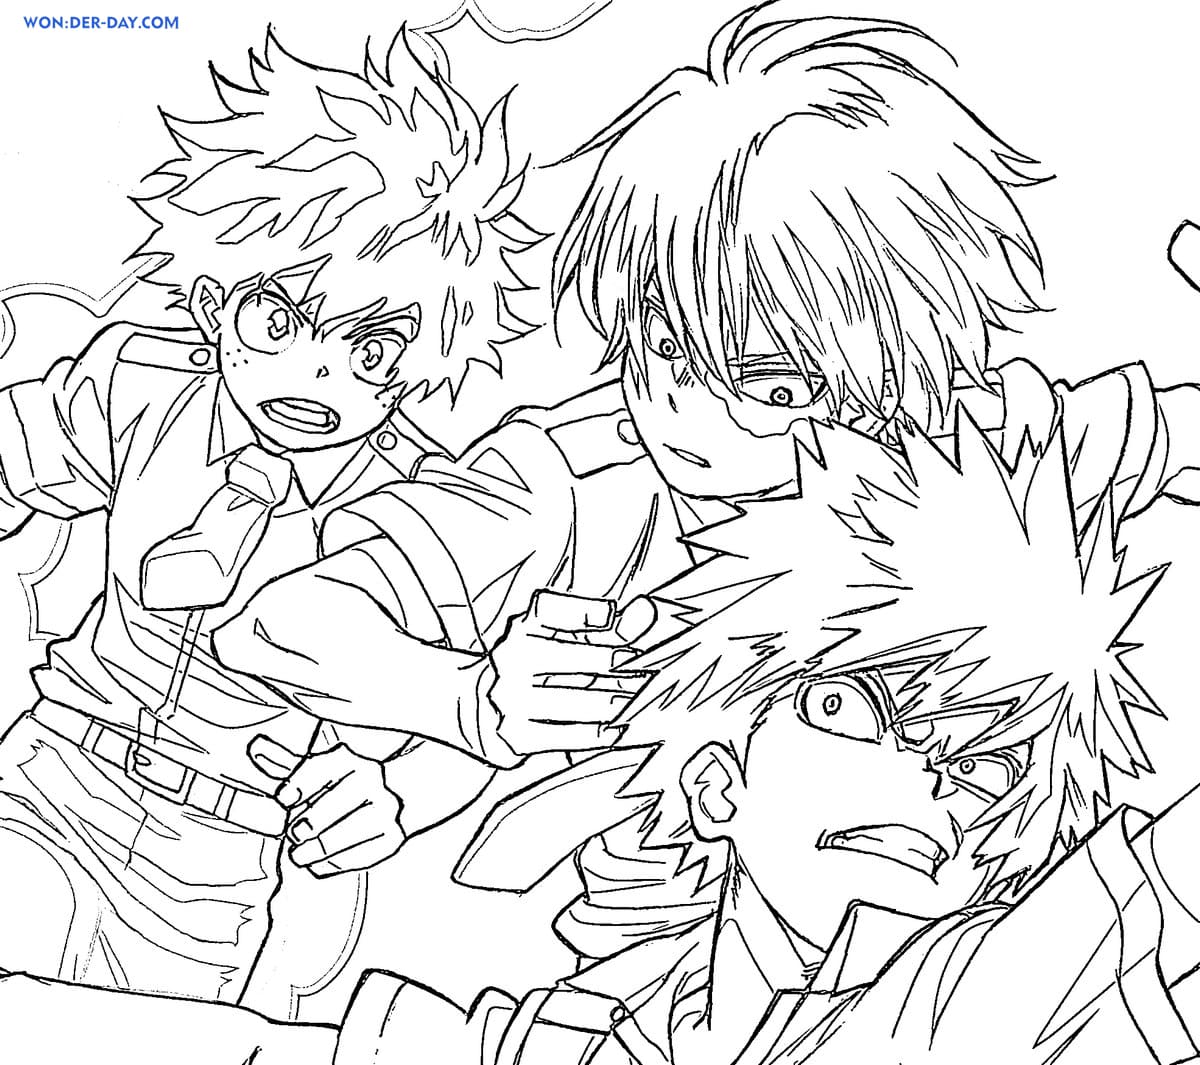 Deku coloring pages Free coloring pages WONDER DAY — Coloring pages